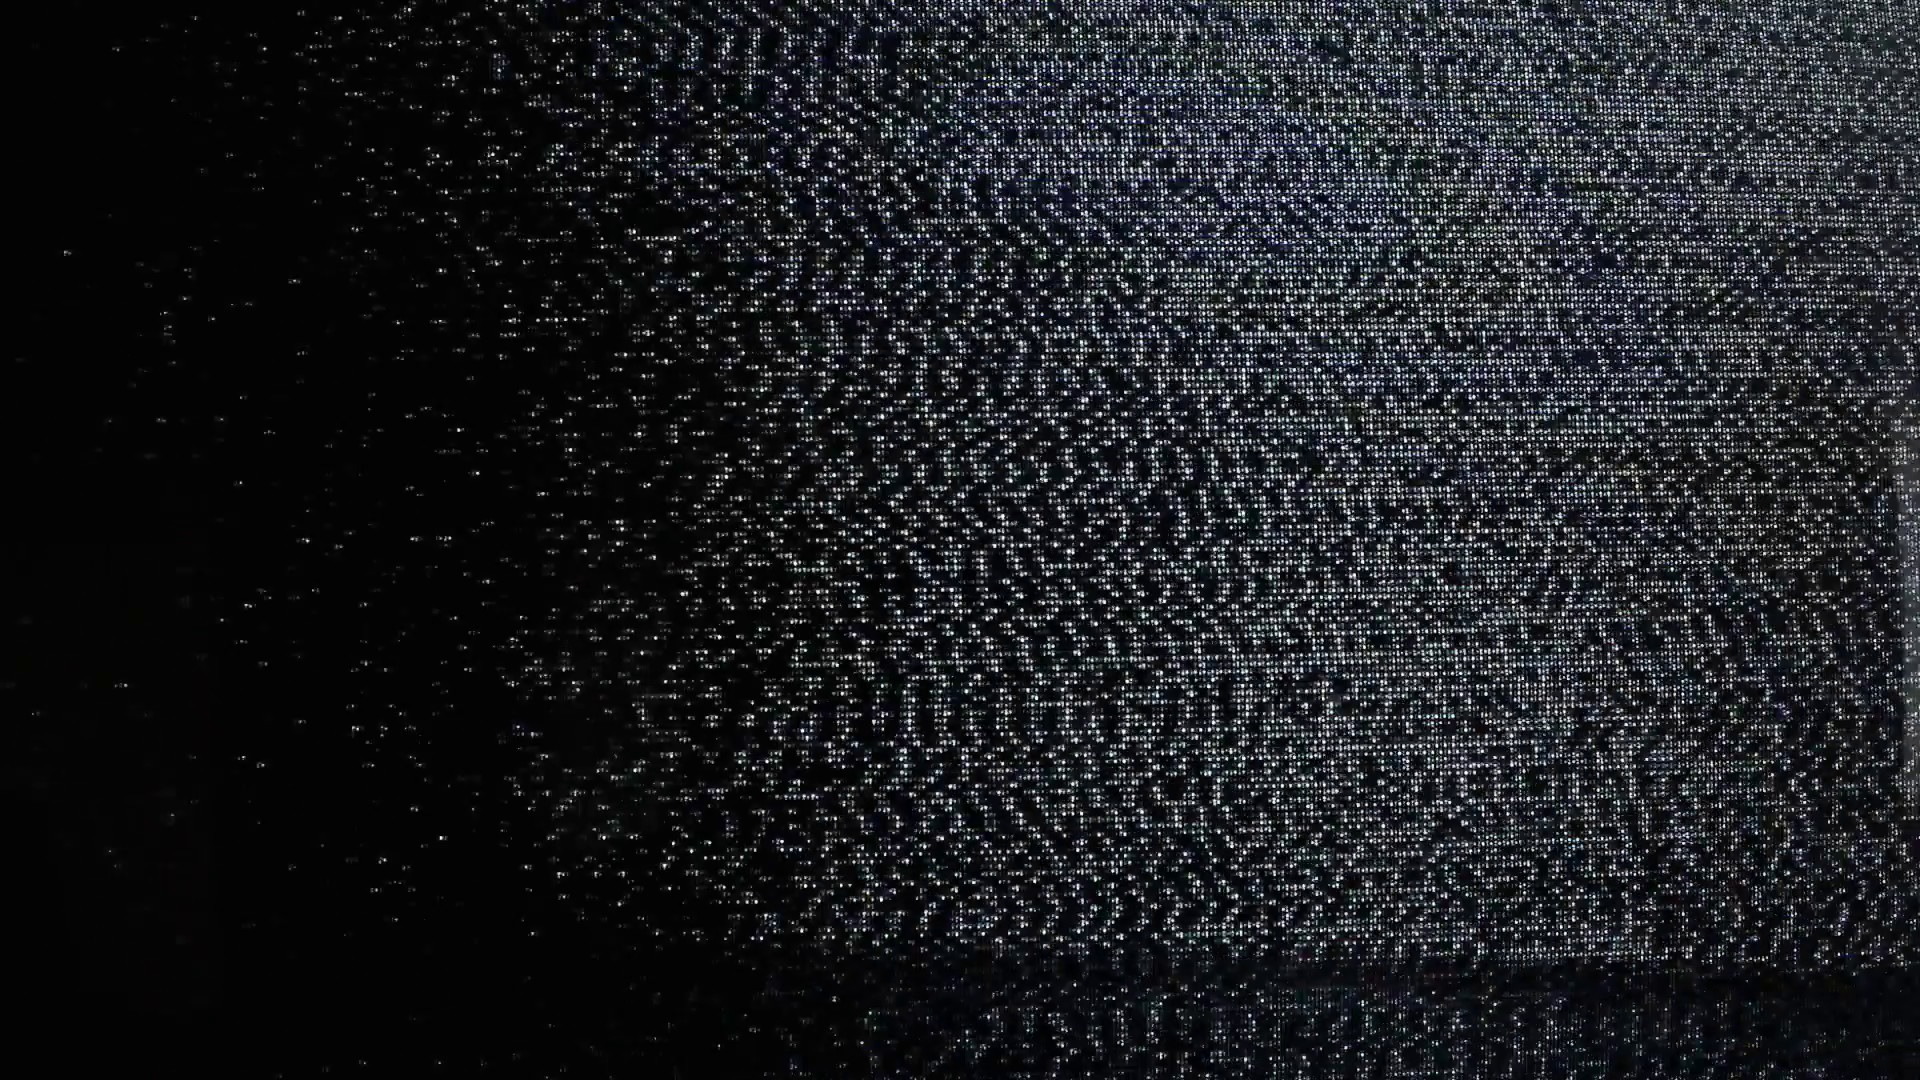 1920x1080 Tv noise pollution waves. Waves of static grainy noise from an old analog tv  screen. Bad signal, weak reception, digital pollution. Real footage.